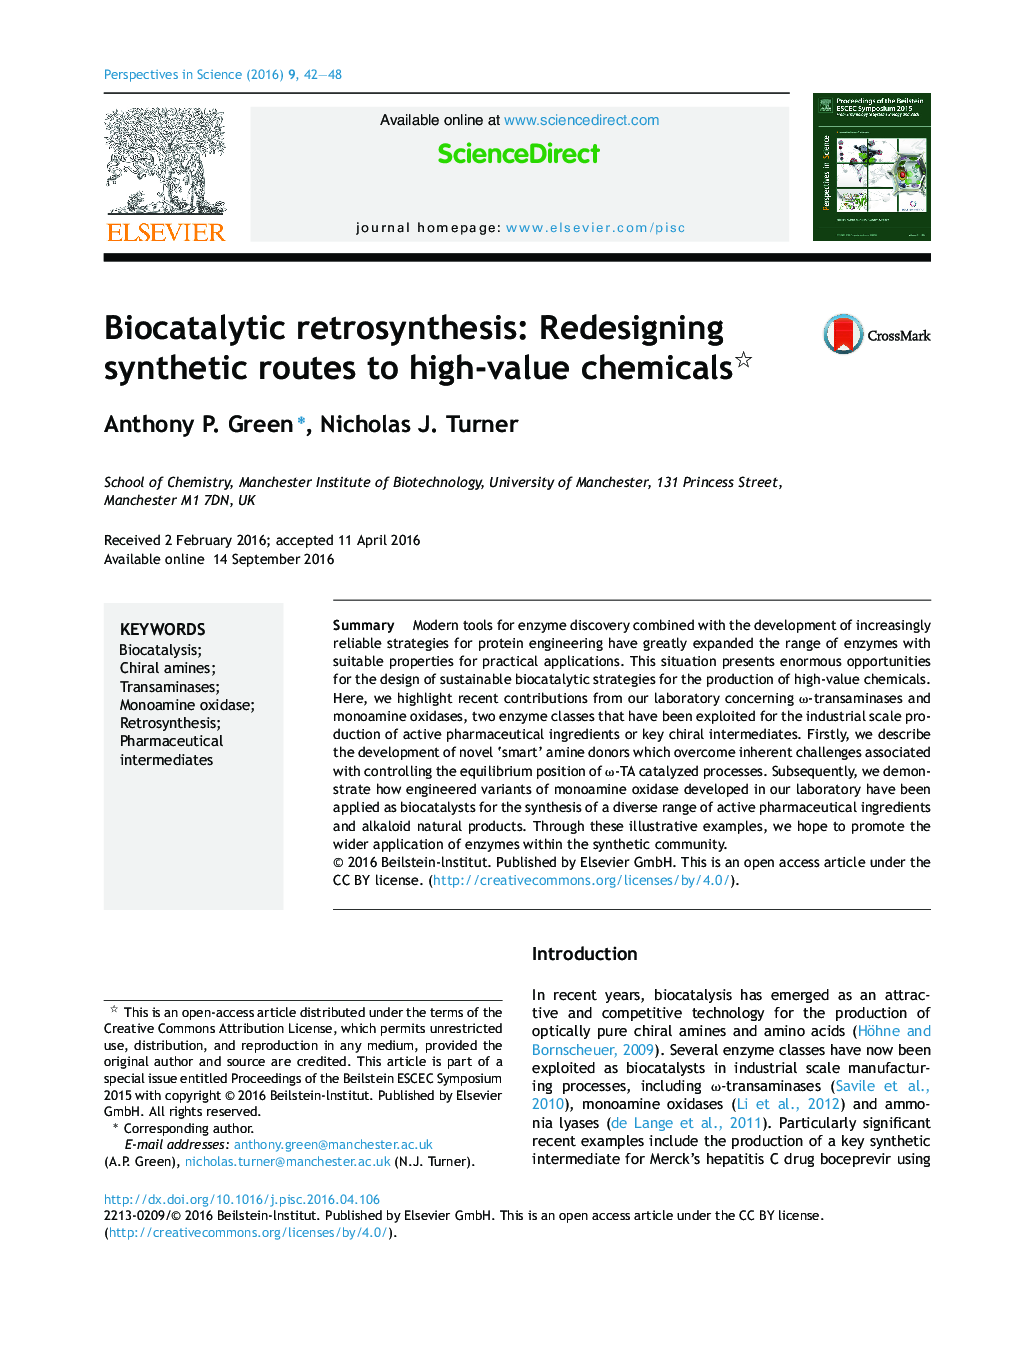 Biocatalytic retrosynthesis: Redesigning synthetic routes to high-value chemicals